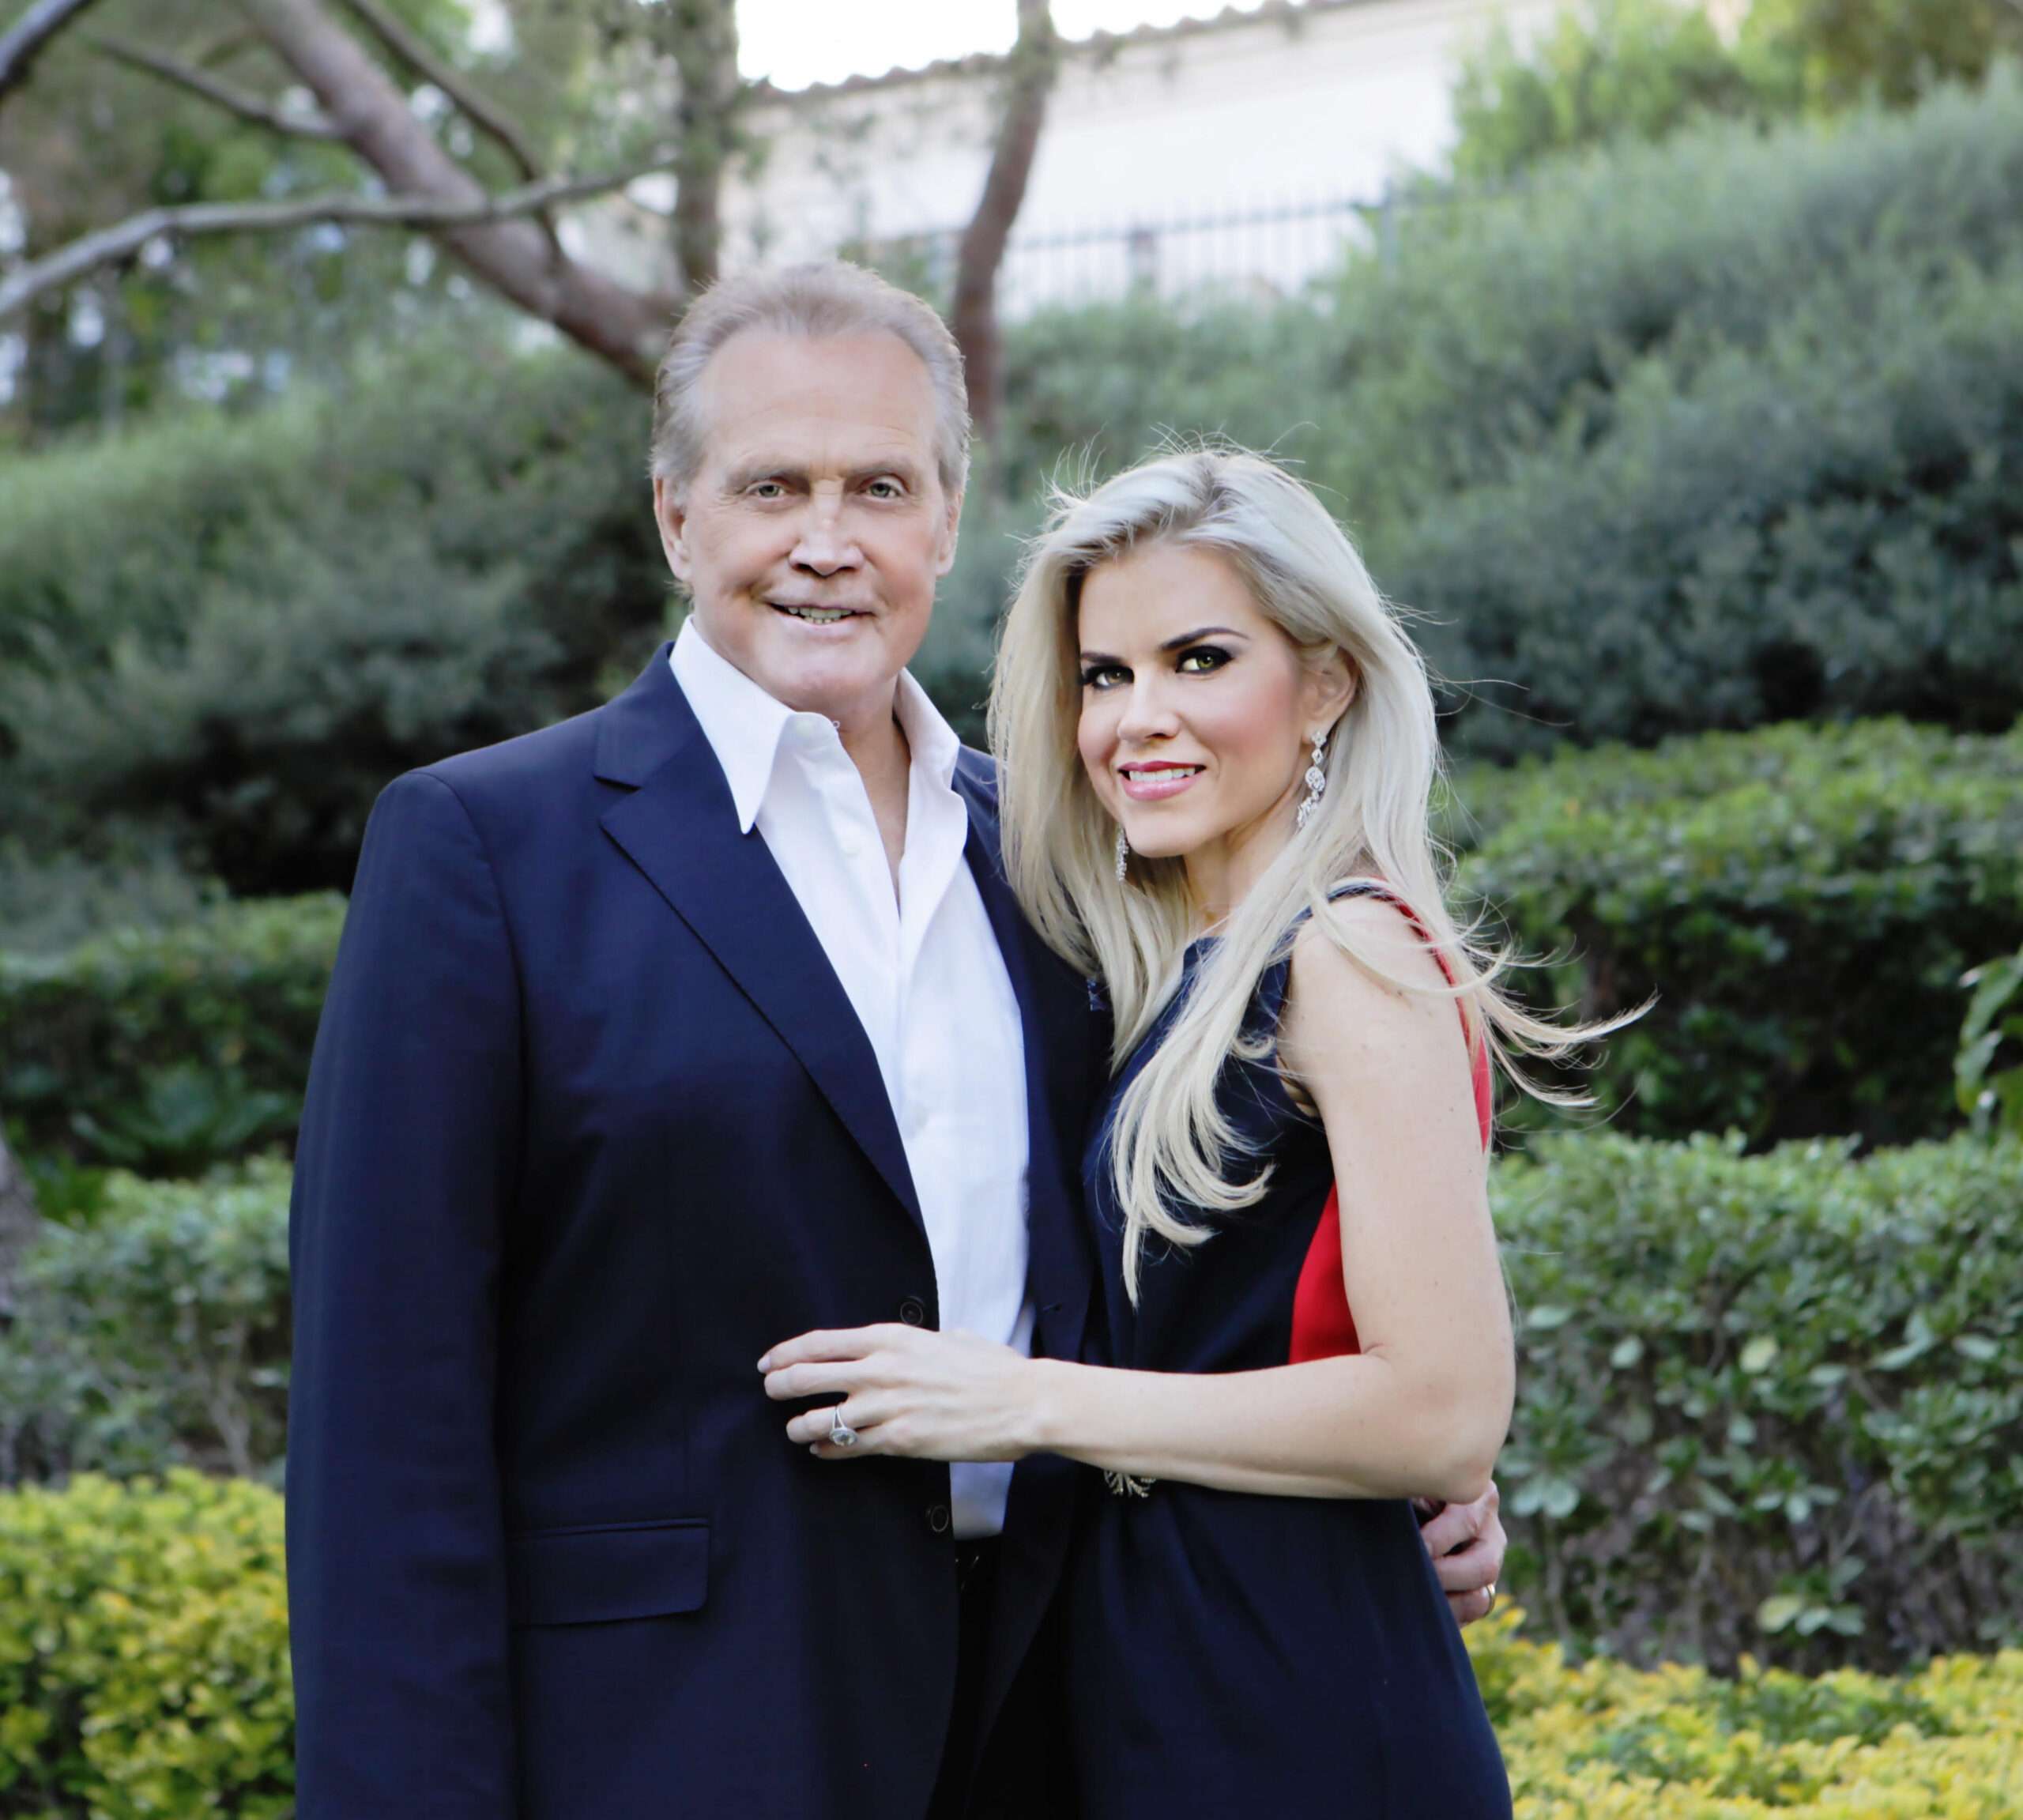 Lee Majors' Wife Faith Majors Biography: Children, Age, Movies, Net Worth, Instagram, Age Difference, Height